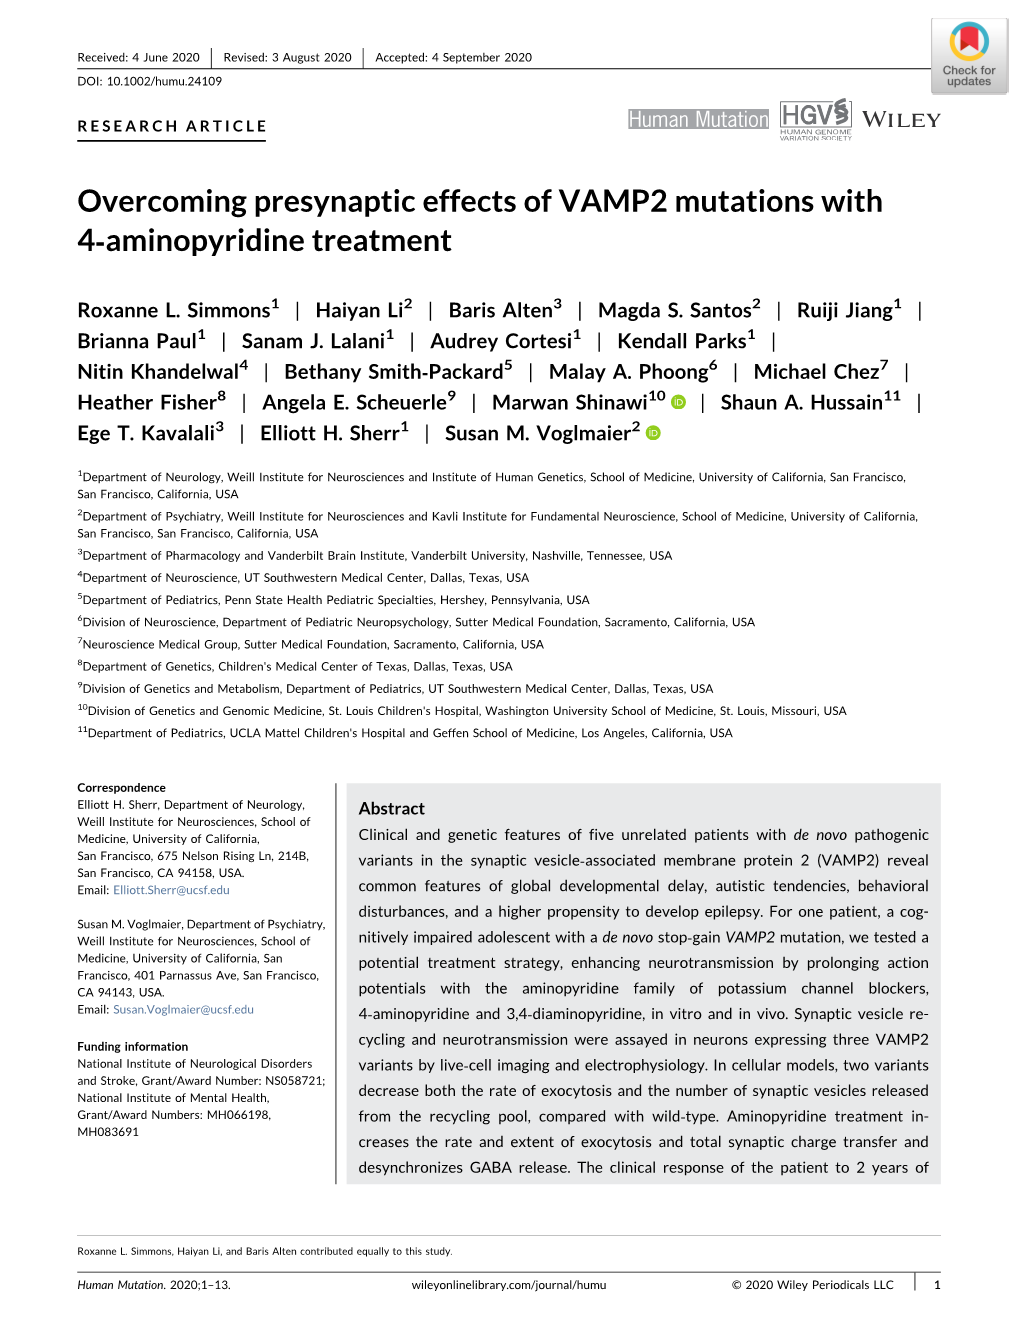 Overcoming Presynaptic Effects of VAMP2 Mutations with 4‐Aminopyridine Treatment